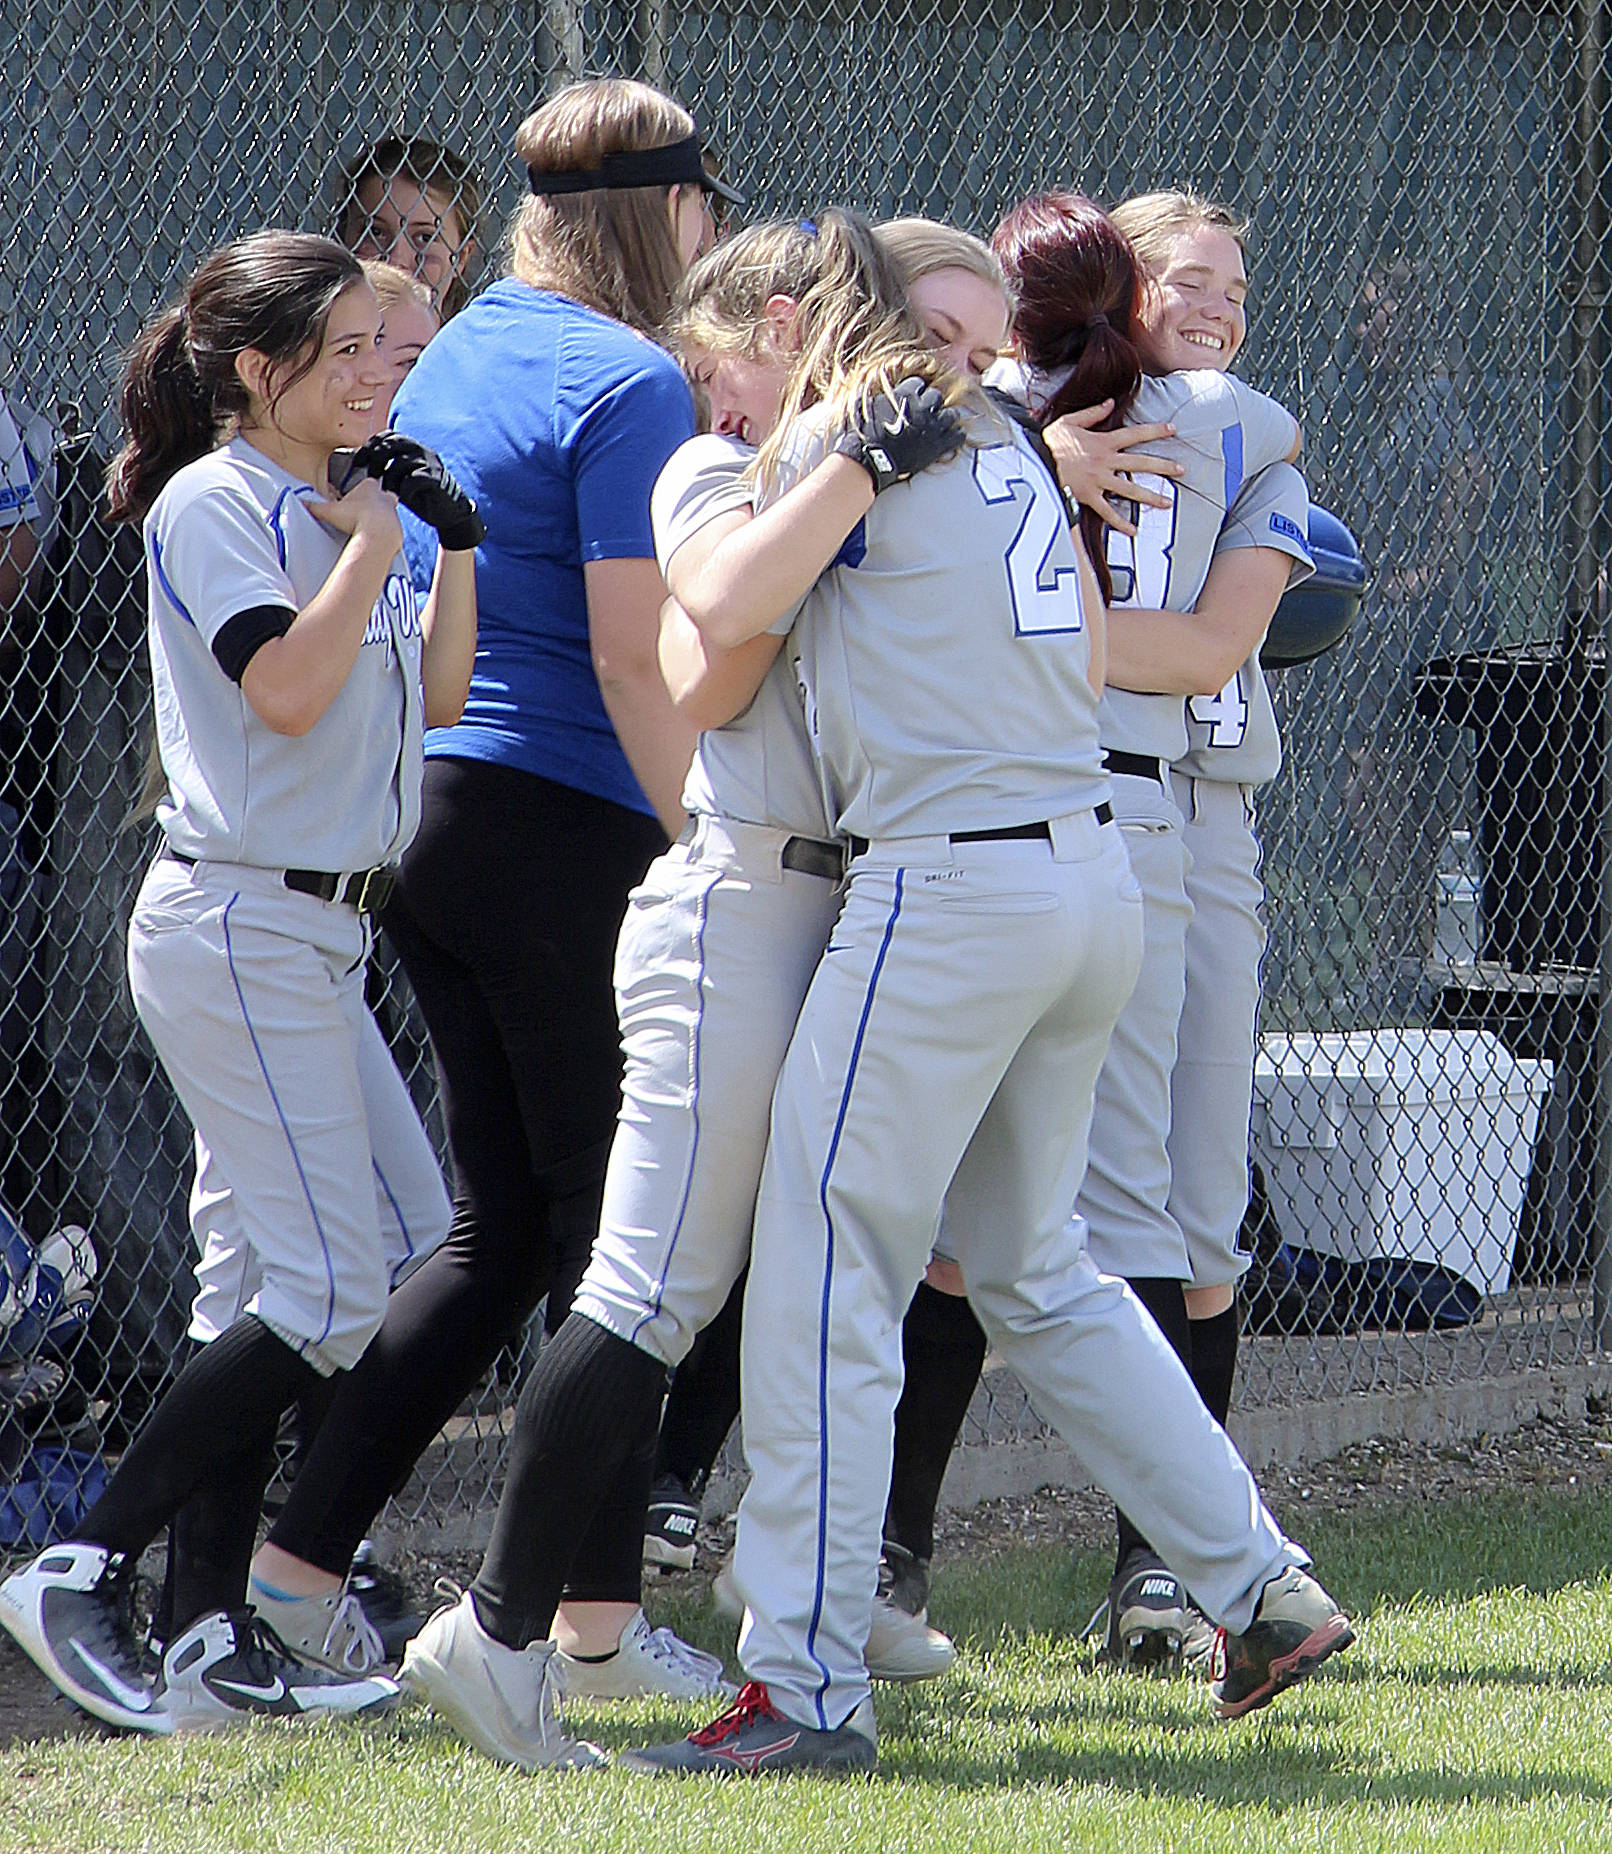 Lady Vikings softball heads to state | Boys lose at state after winning district championship